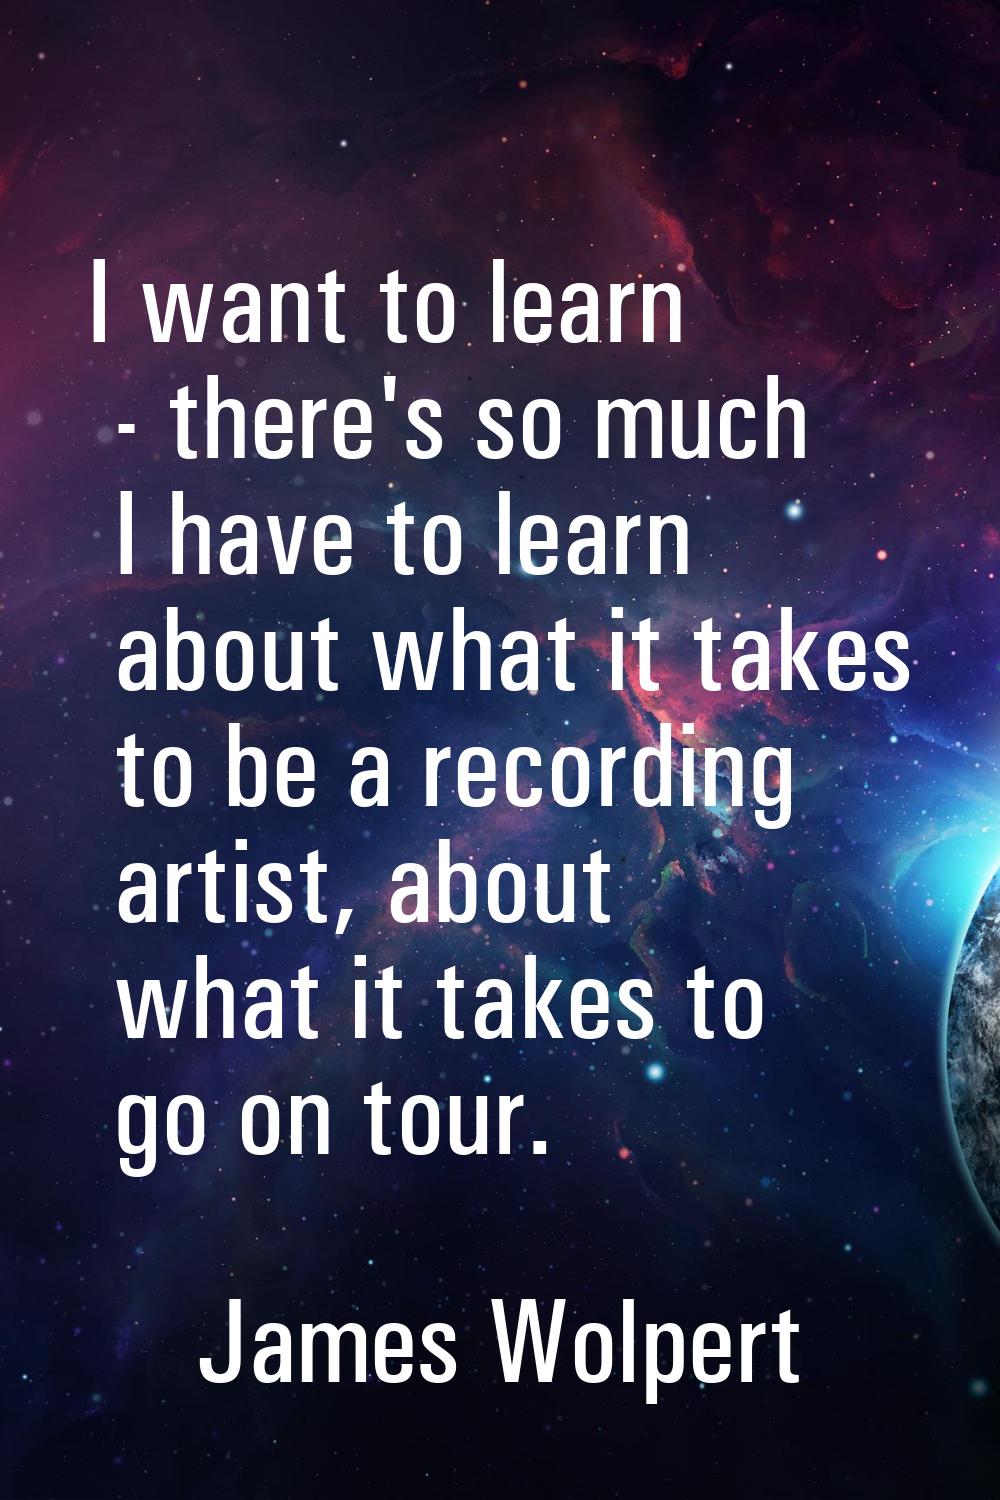 I want to learn - there's so much I have to learn about what it takes to be a recording artist, abo